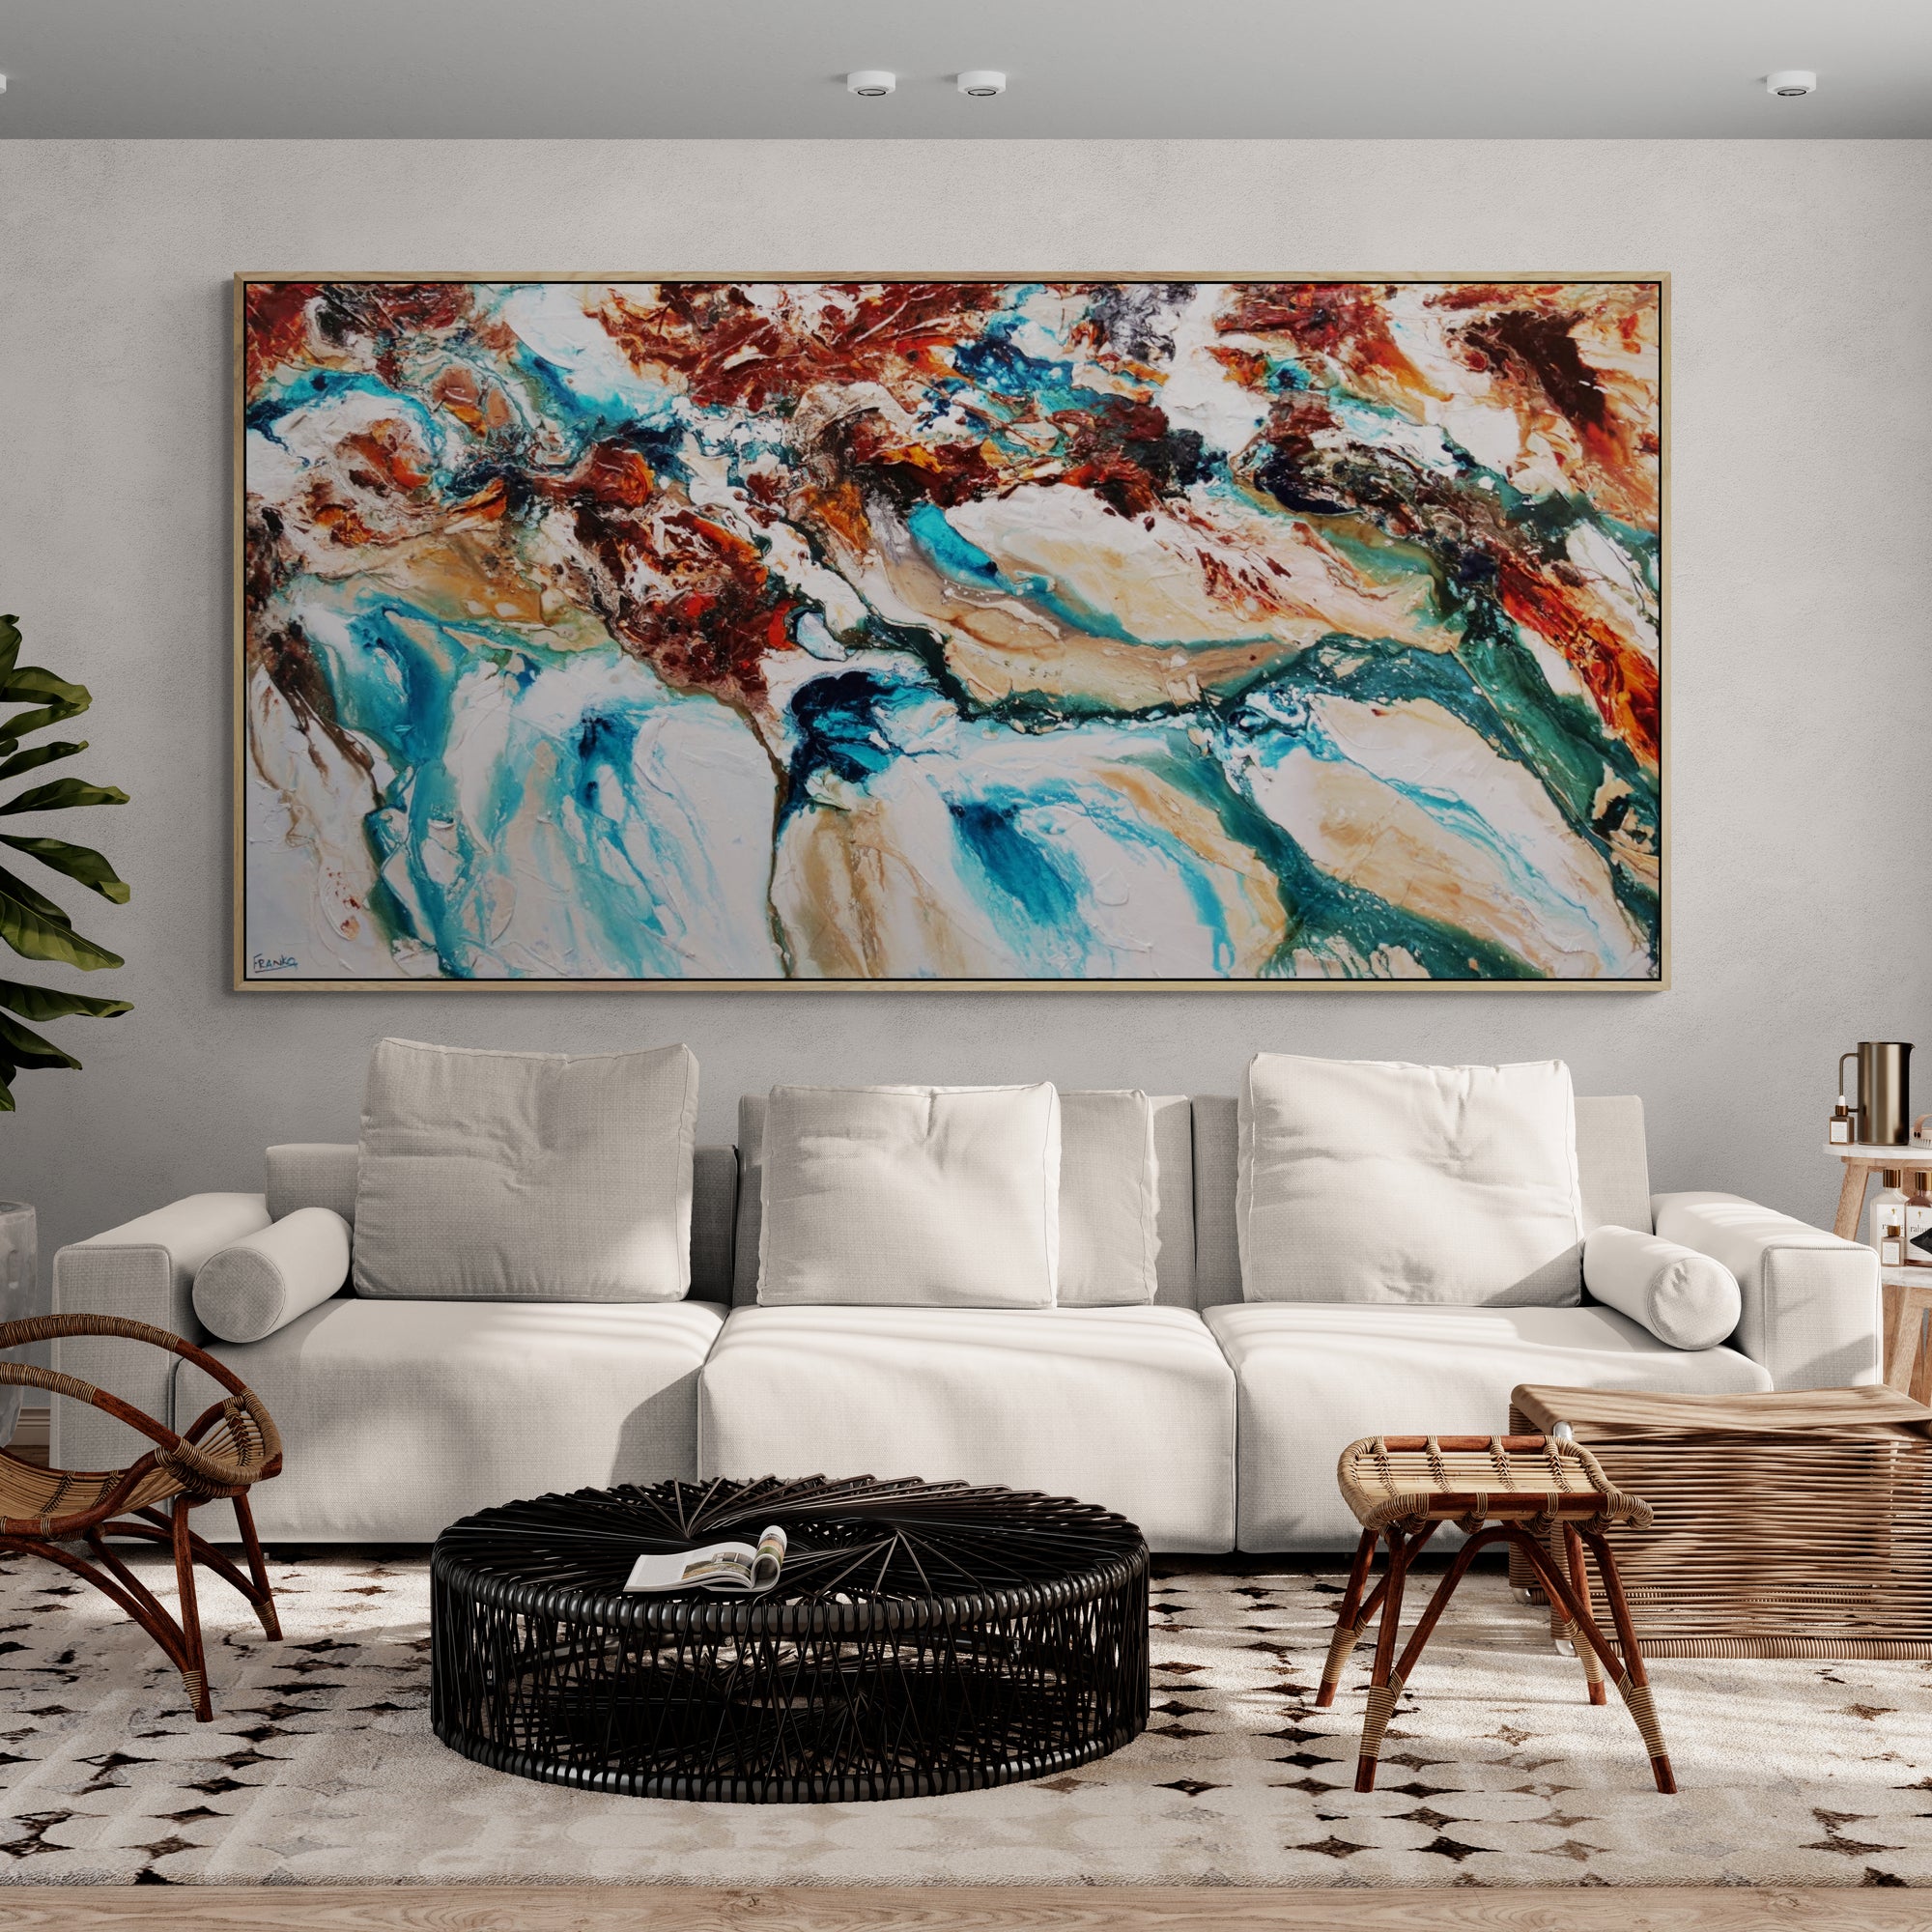 Southern Rock 240cm x 120cm Teal Cream Oxide Textured Abstract Painting (SOLD)